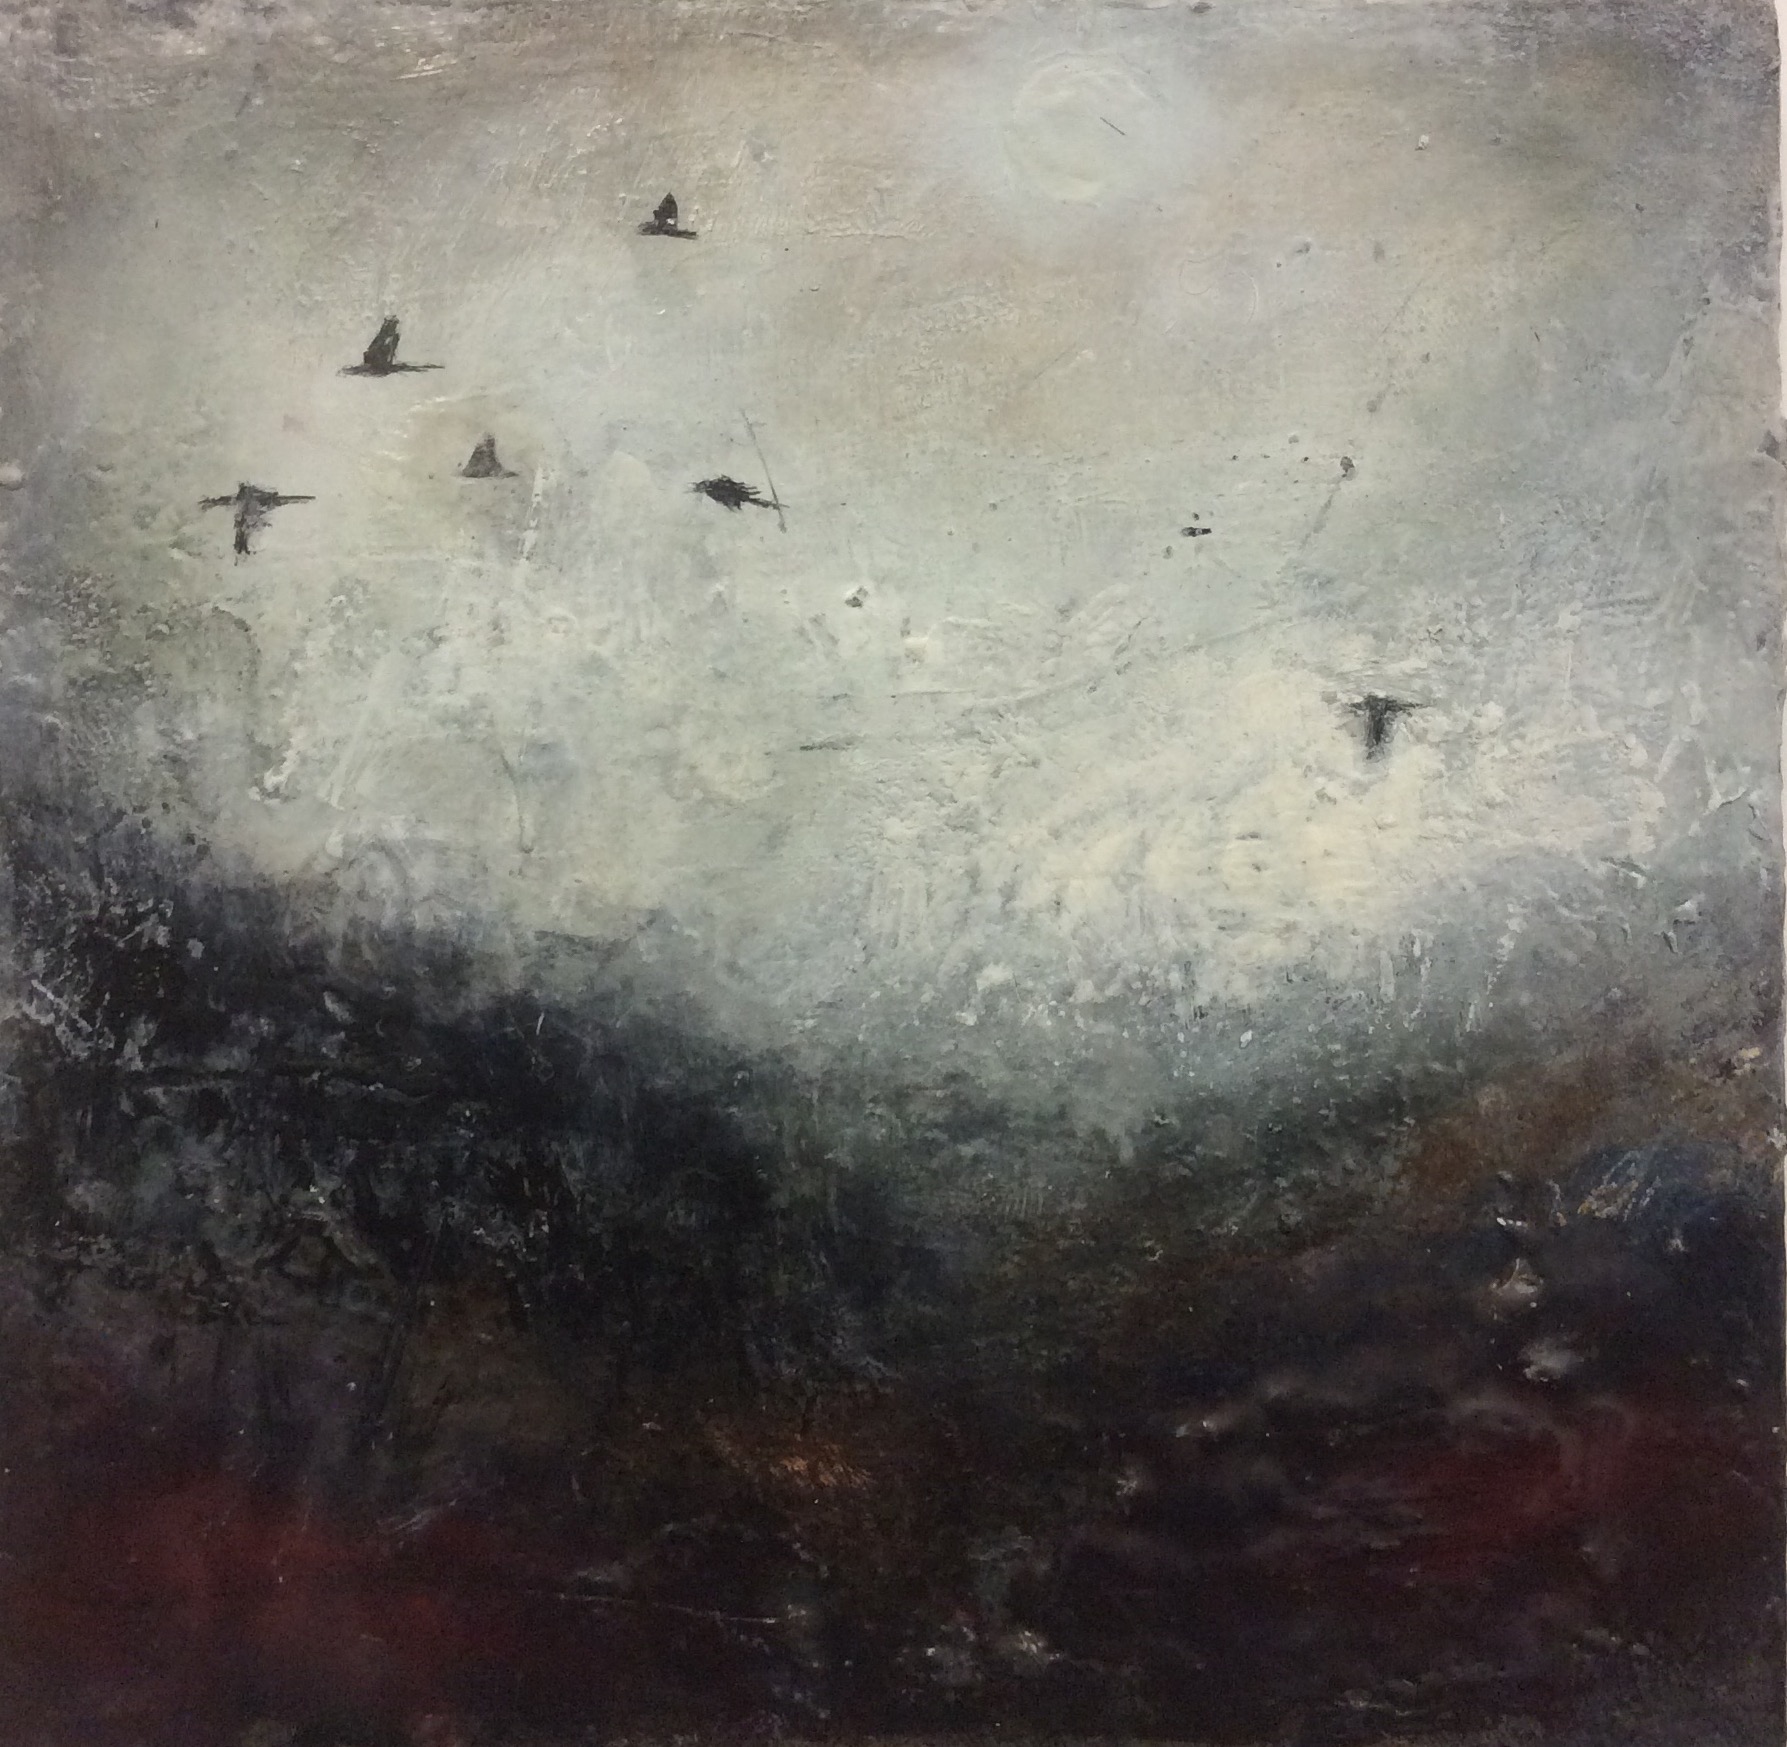 Where the crows fly 40cm x 40cm